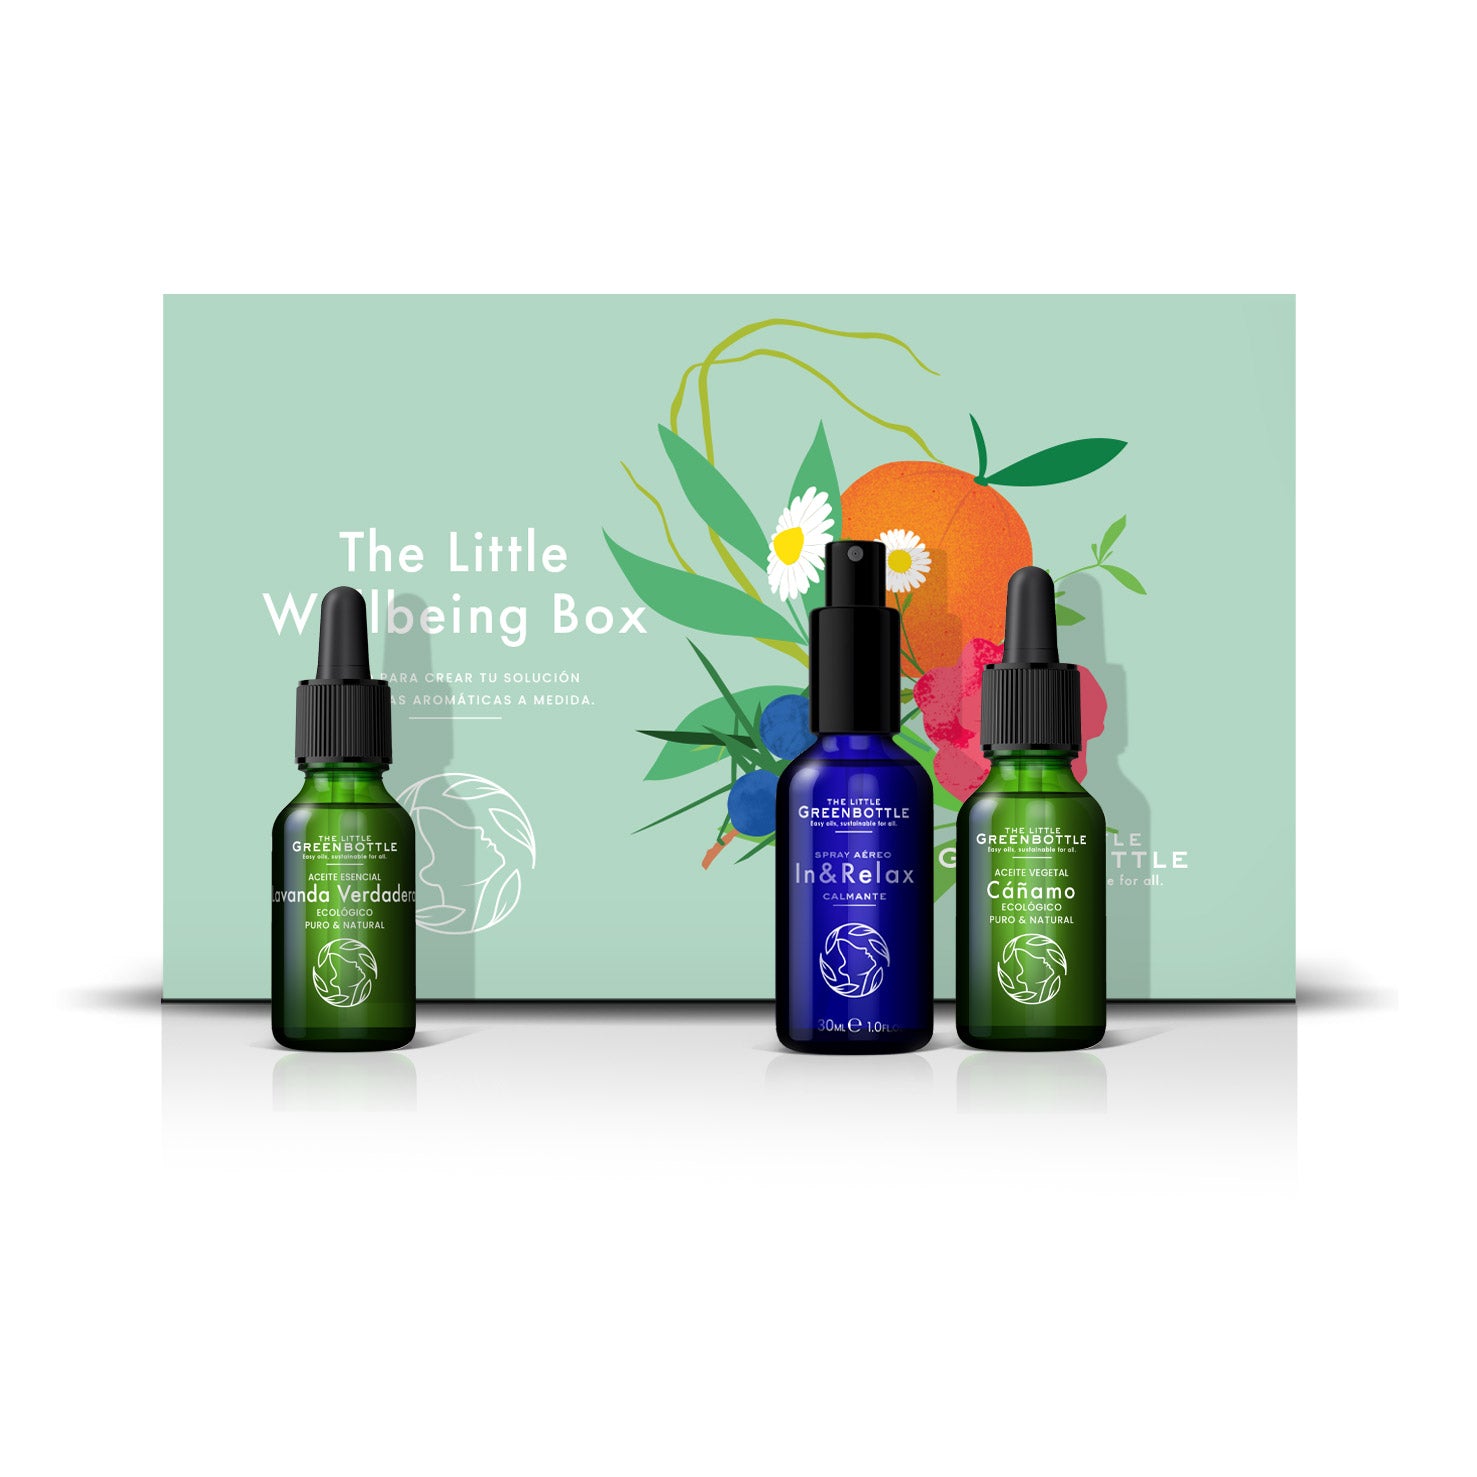 THE LITTLE WELLBEING BOX